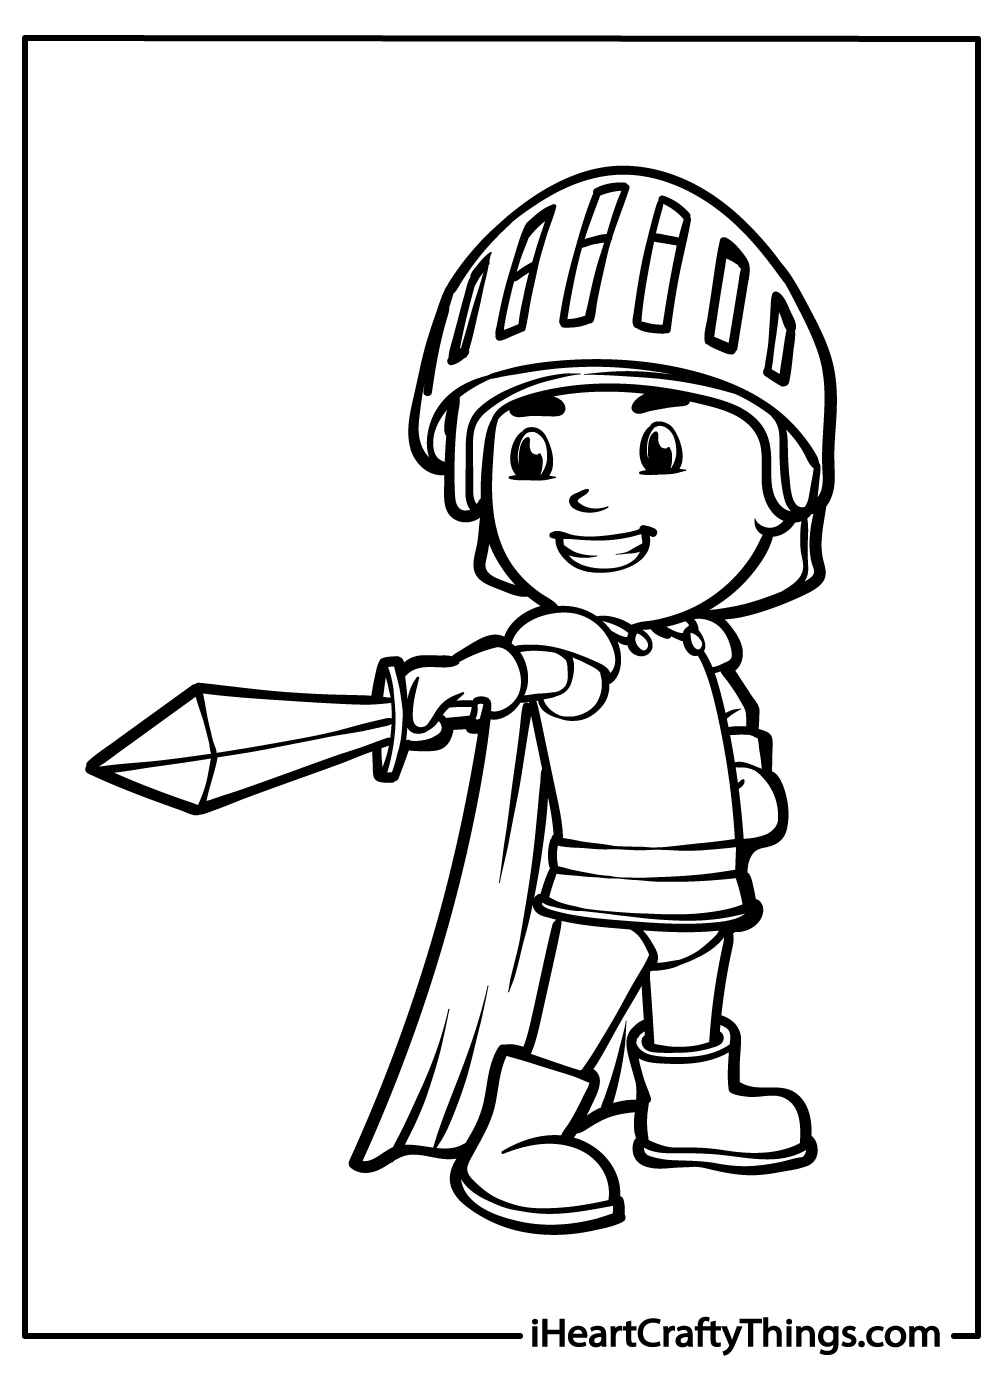 a boy knight coloring pages